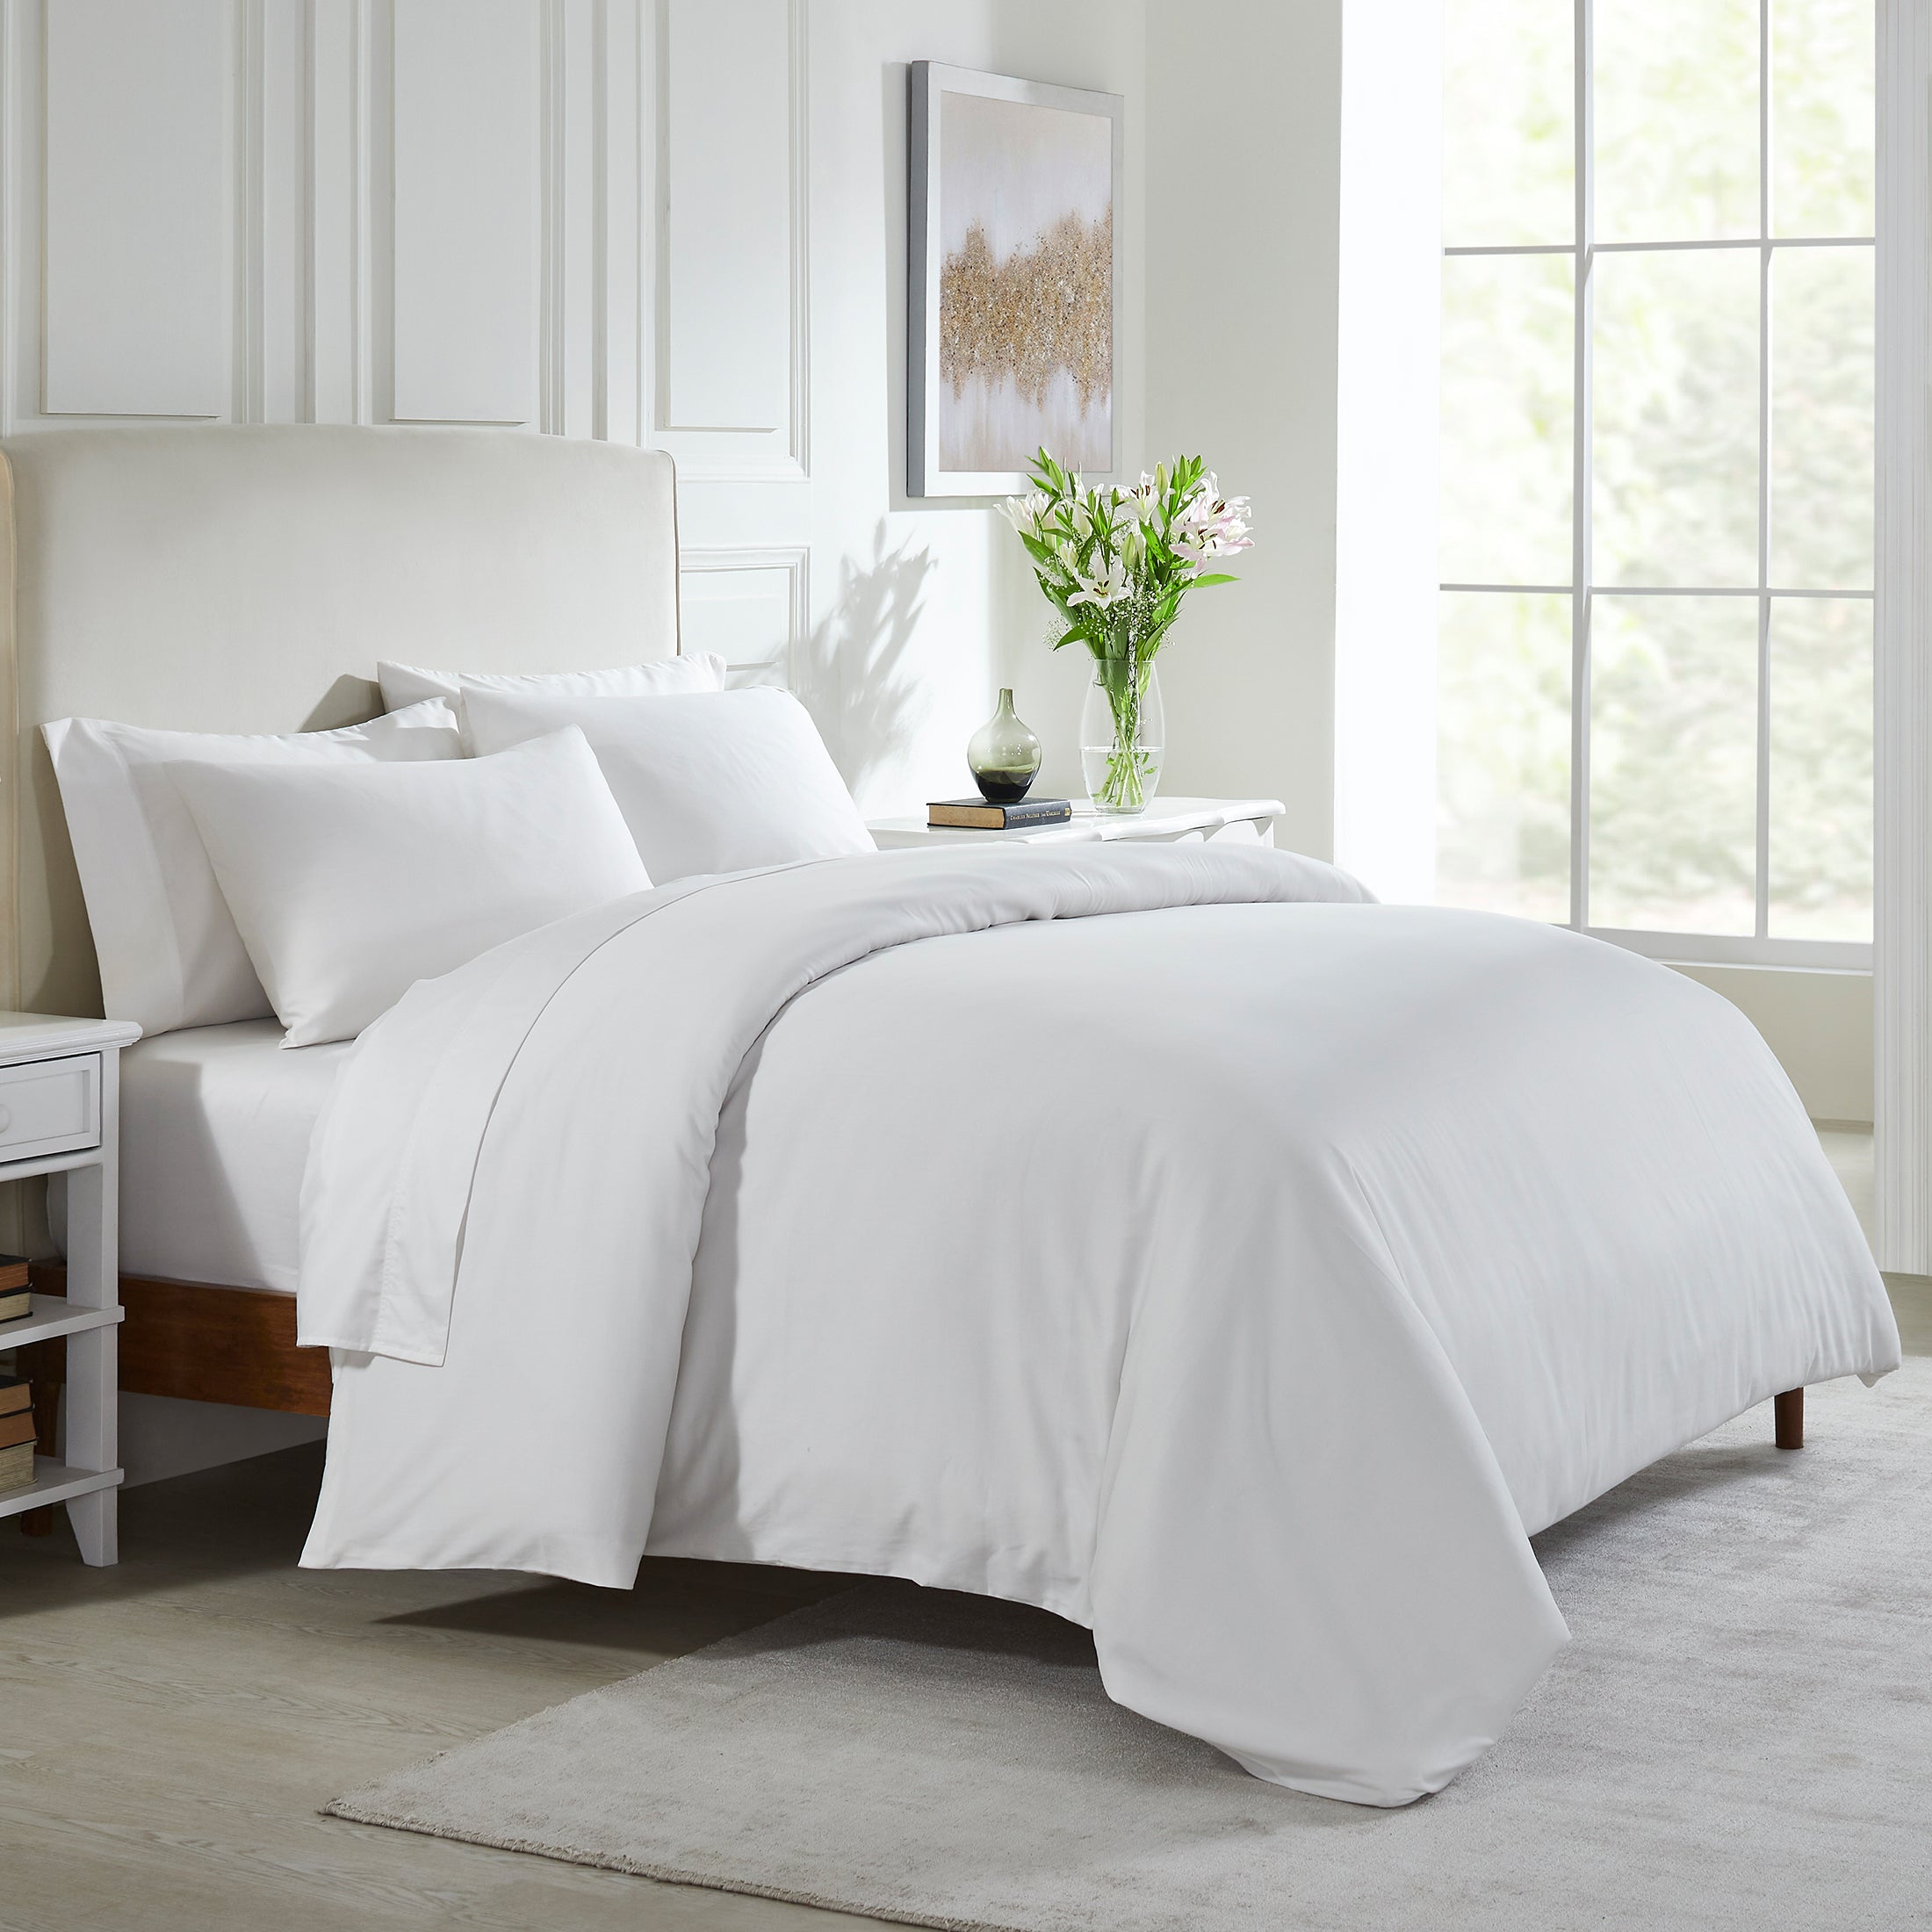 Thread Spread Twin Fitted Sheet Only - 600 Thread Count Bright White Soft 100% Cotton Sateen Weave Fitted Sheet, Deep Pocket Cooling Sheets, Fits